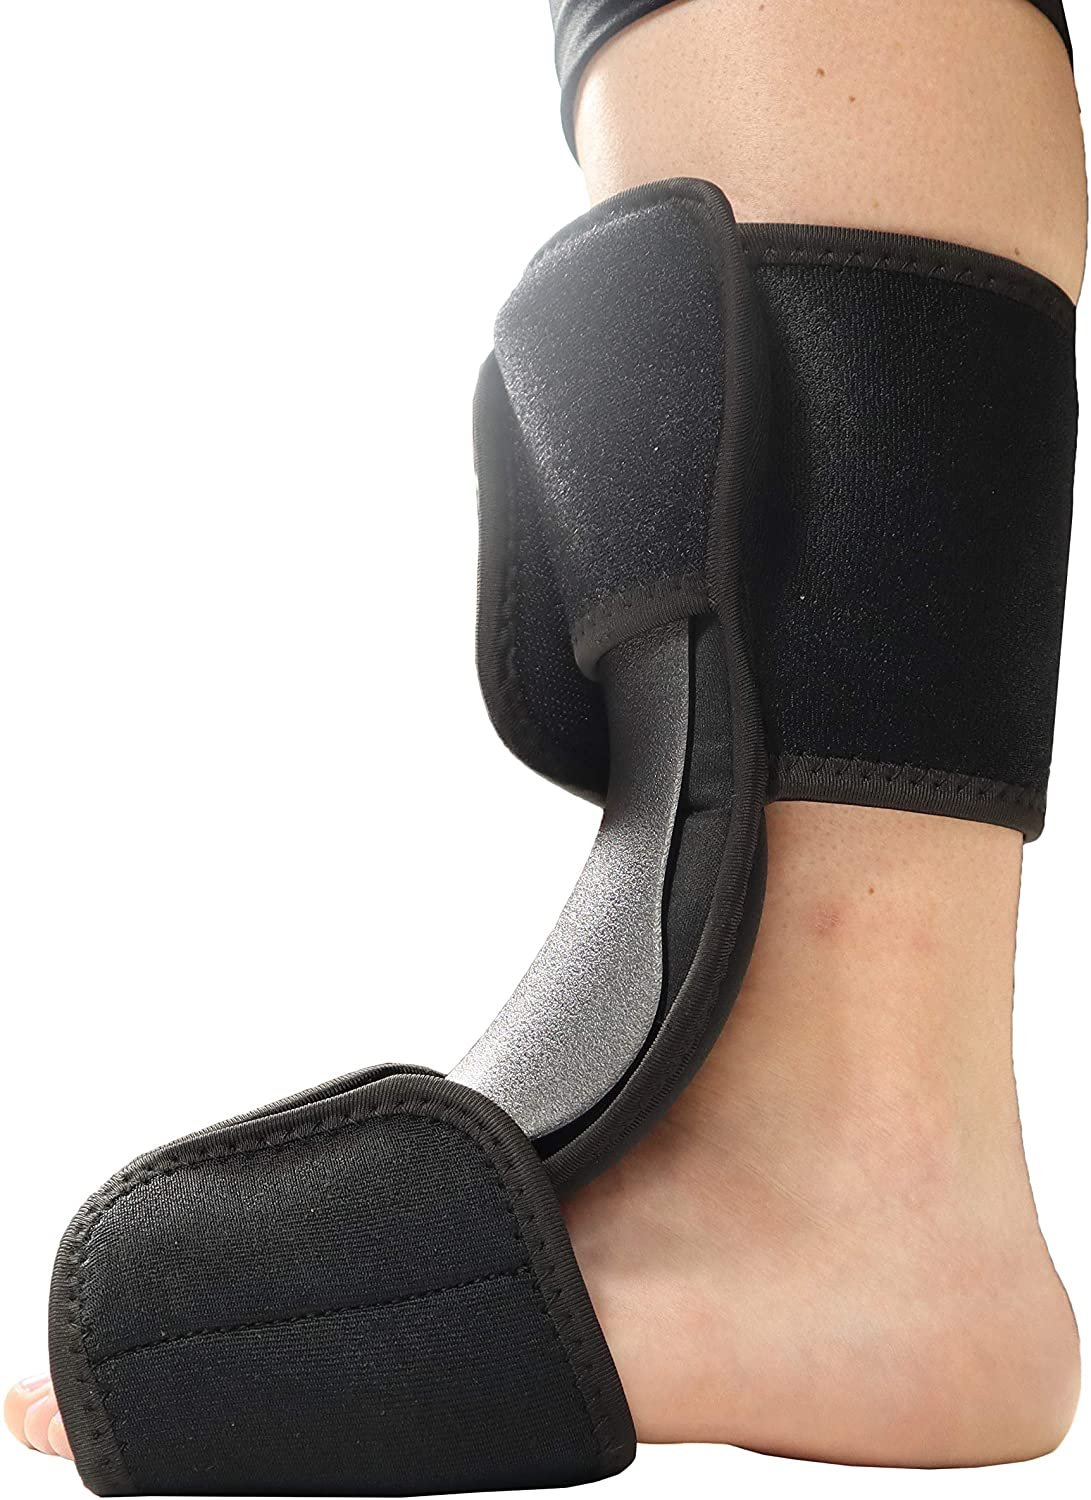 Soft Dorsal Night Splint - Breathable Design for Effective Relief from Plantar Fasciitis Pain, Heel, Arch Foot Pain, and Achilles Tendonitis